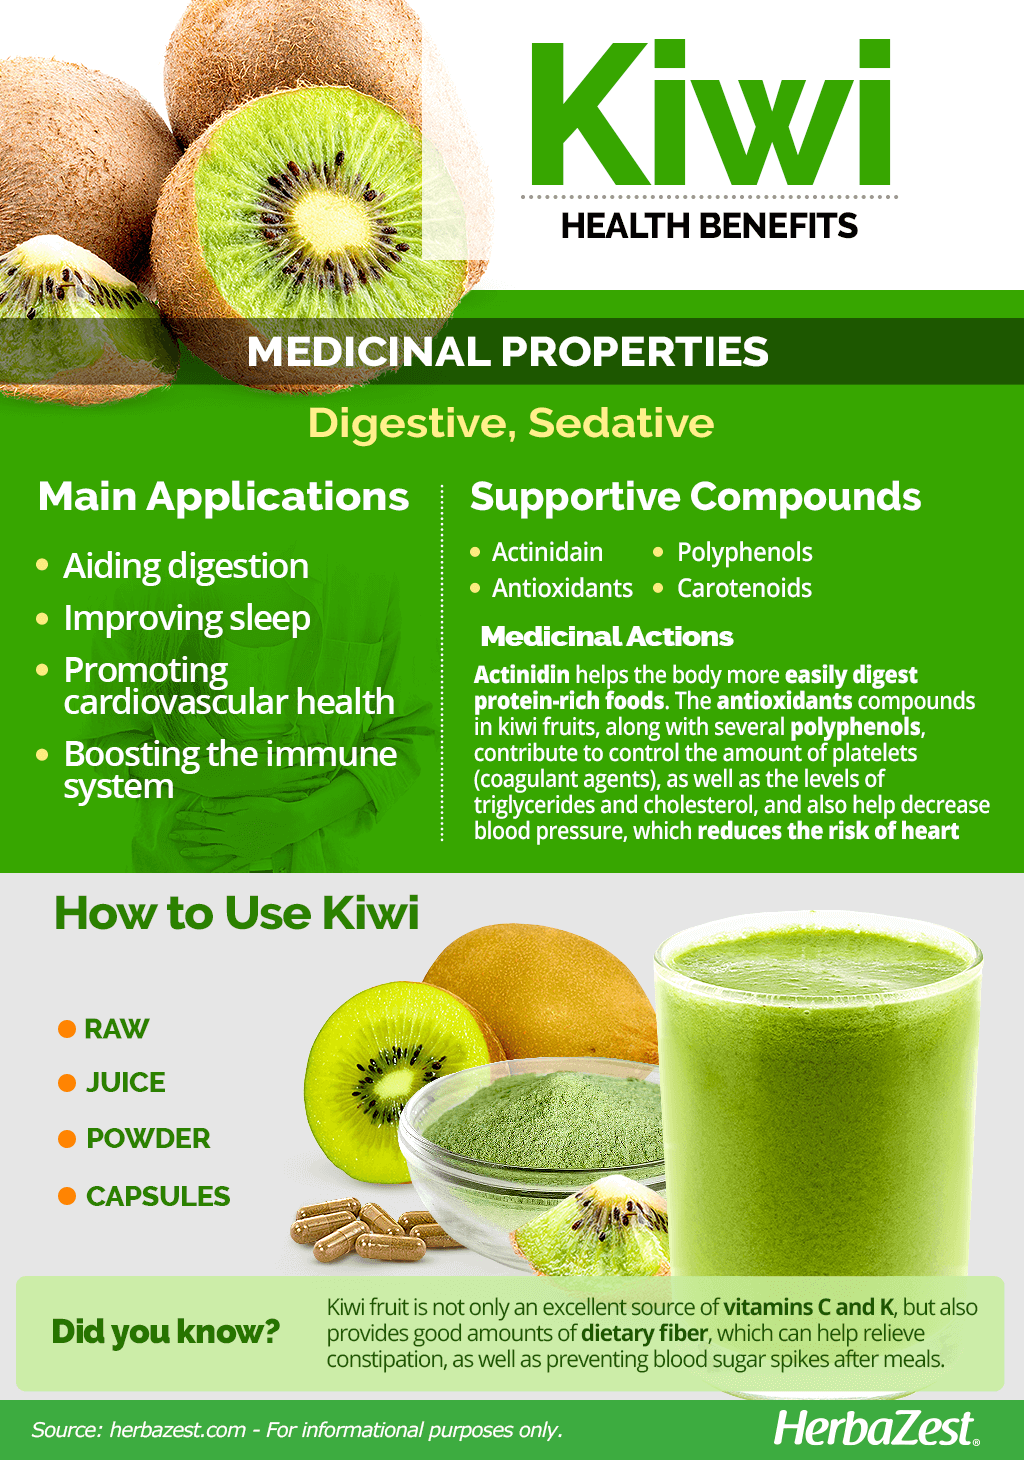 All About Kiwi